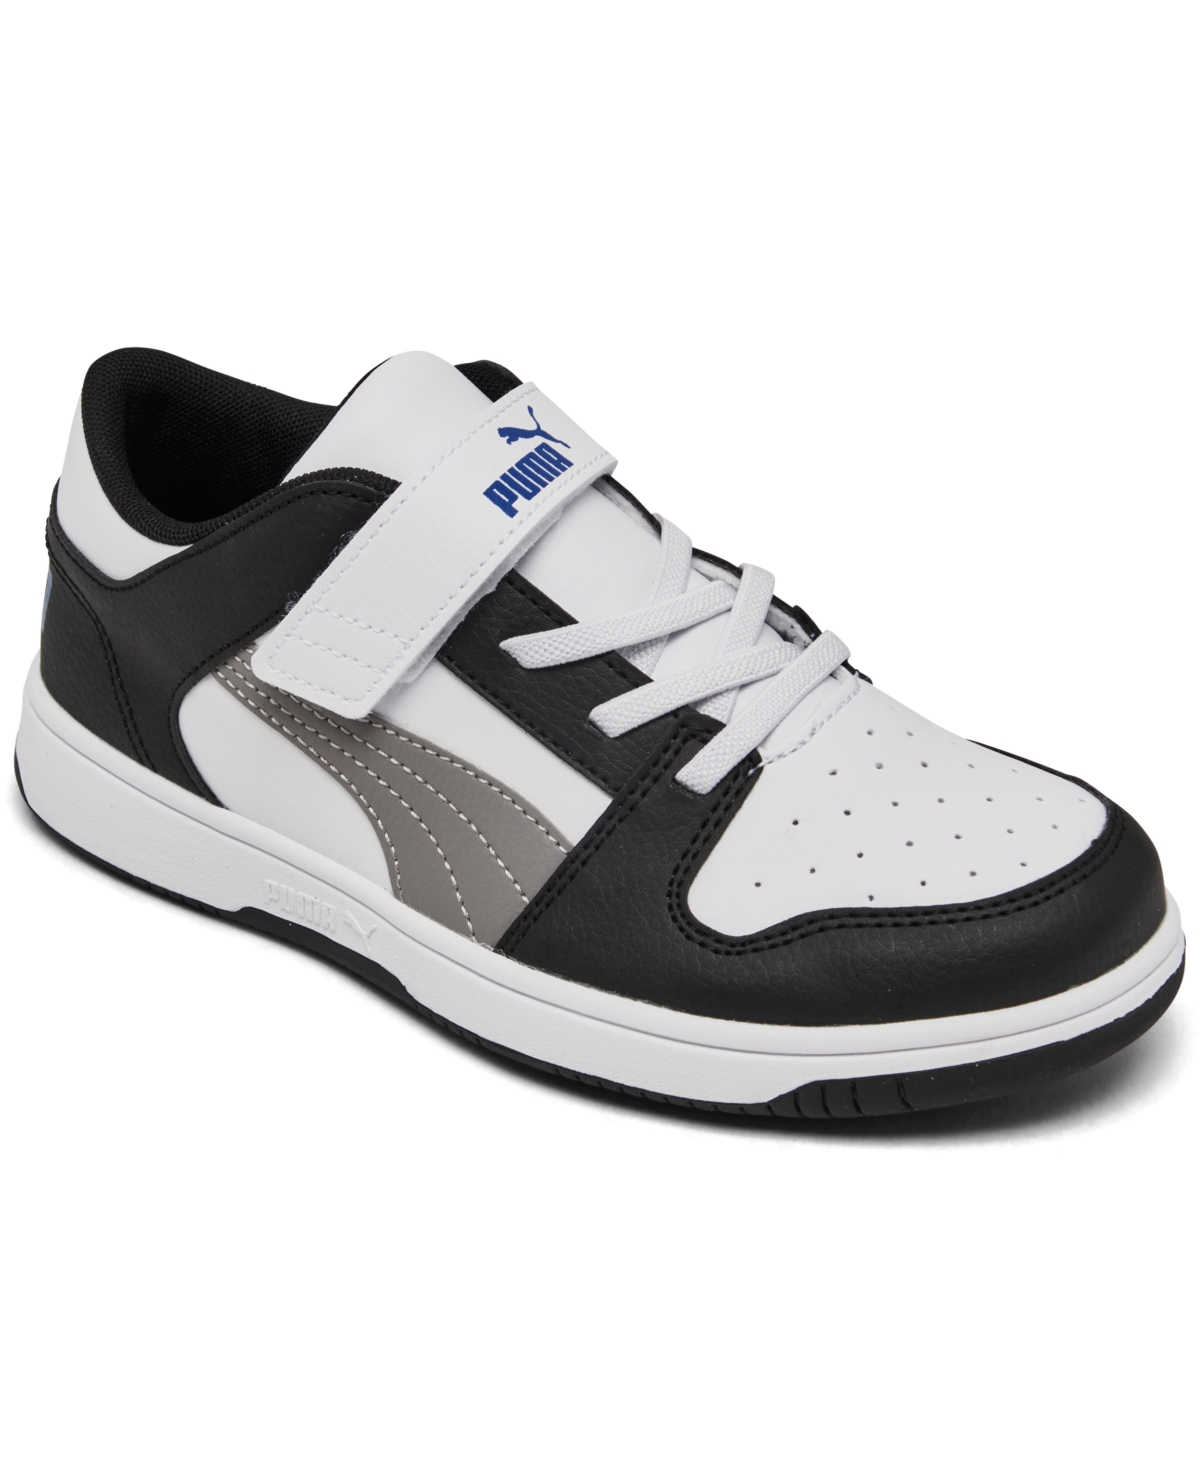 Puma Little Kids Rebound Layup Low Casual Sneakers From Finish Line In Black,white,gray